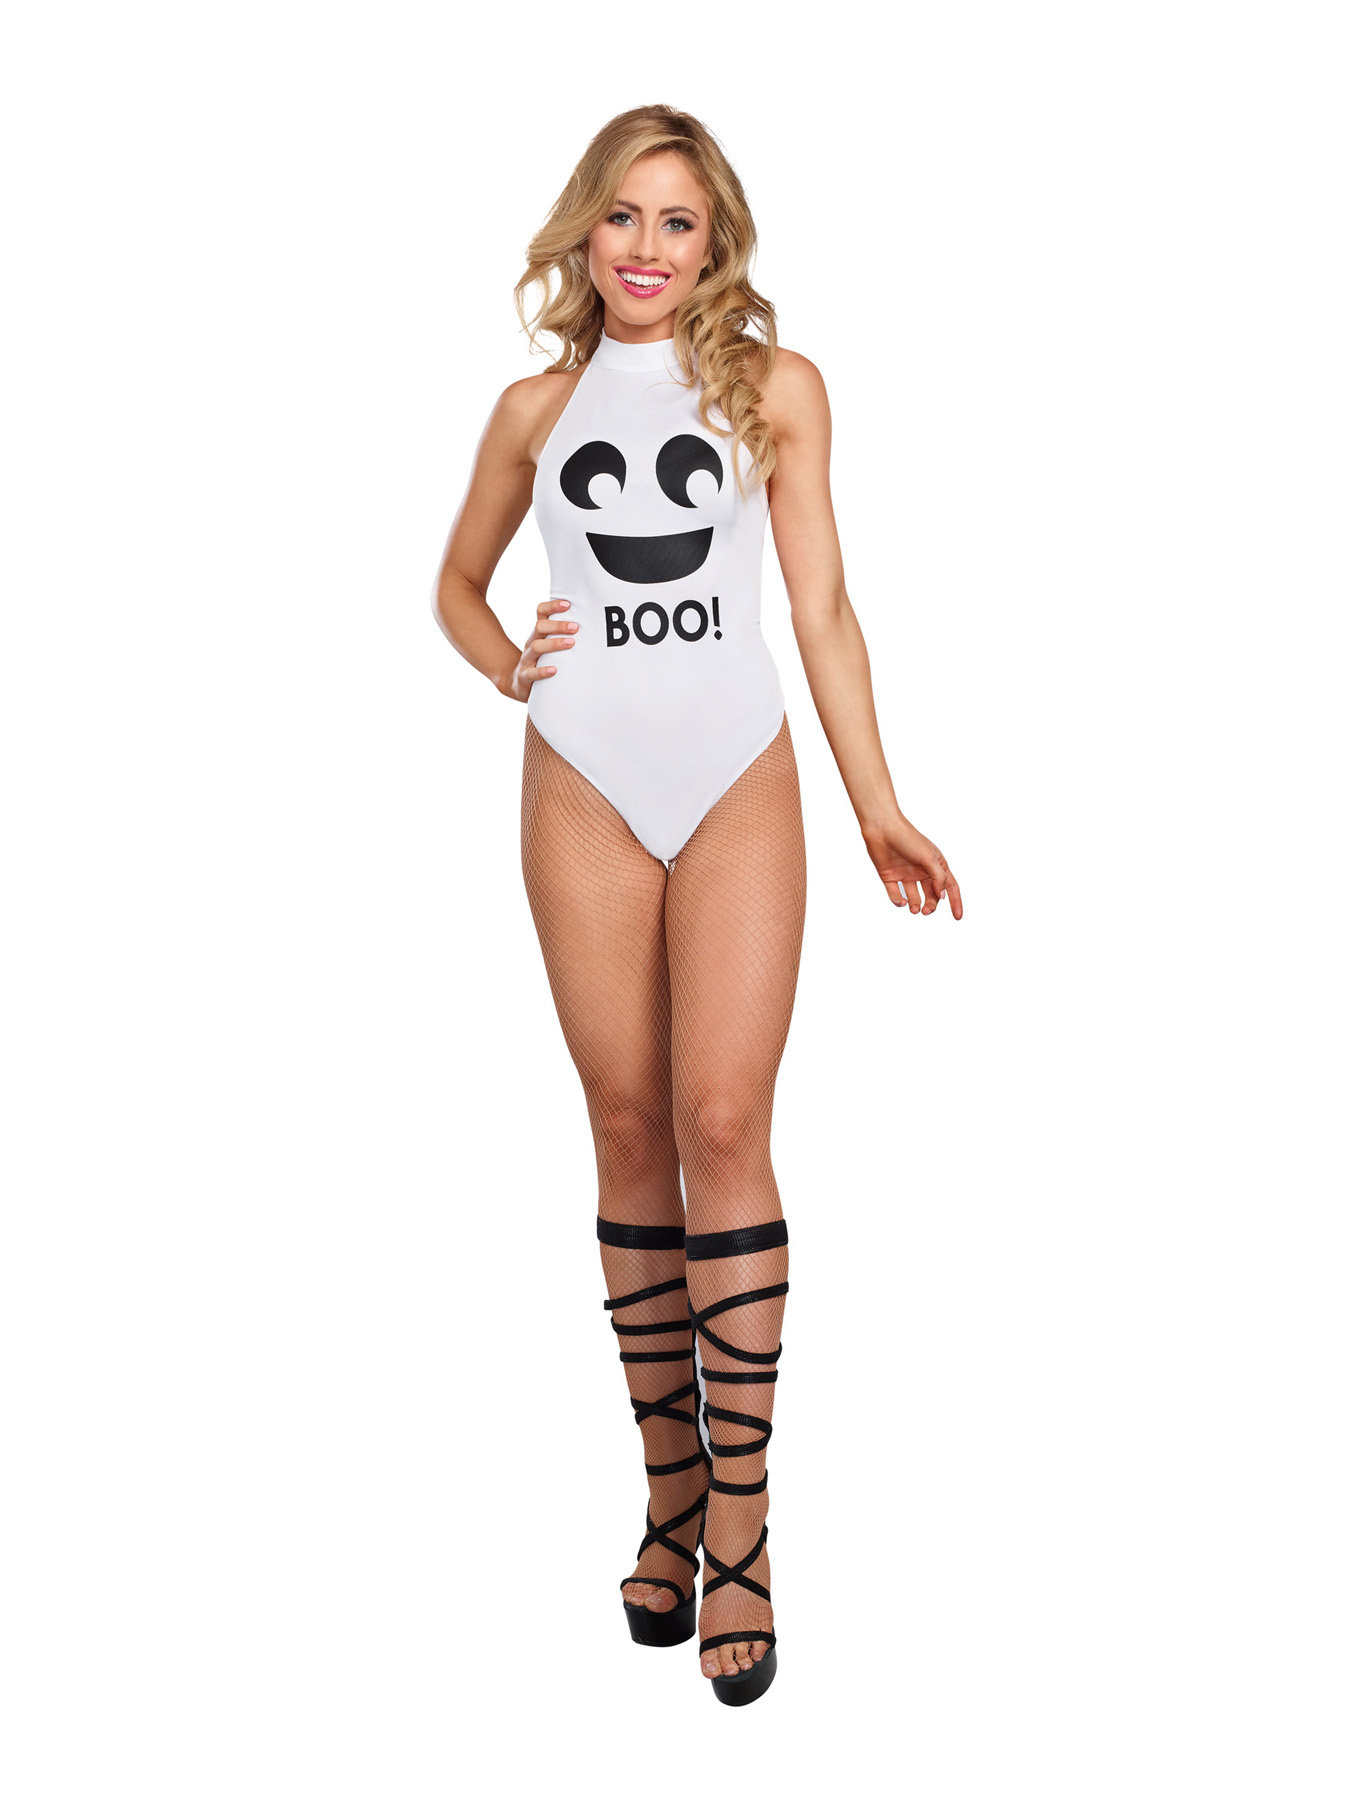 High neck bodysuit with a ghost face and the word "Boo!" ...